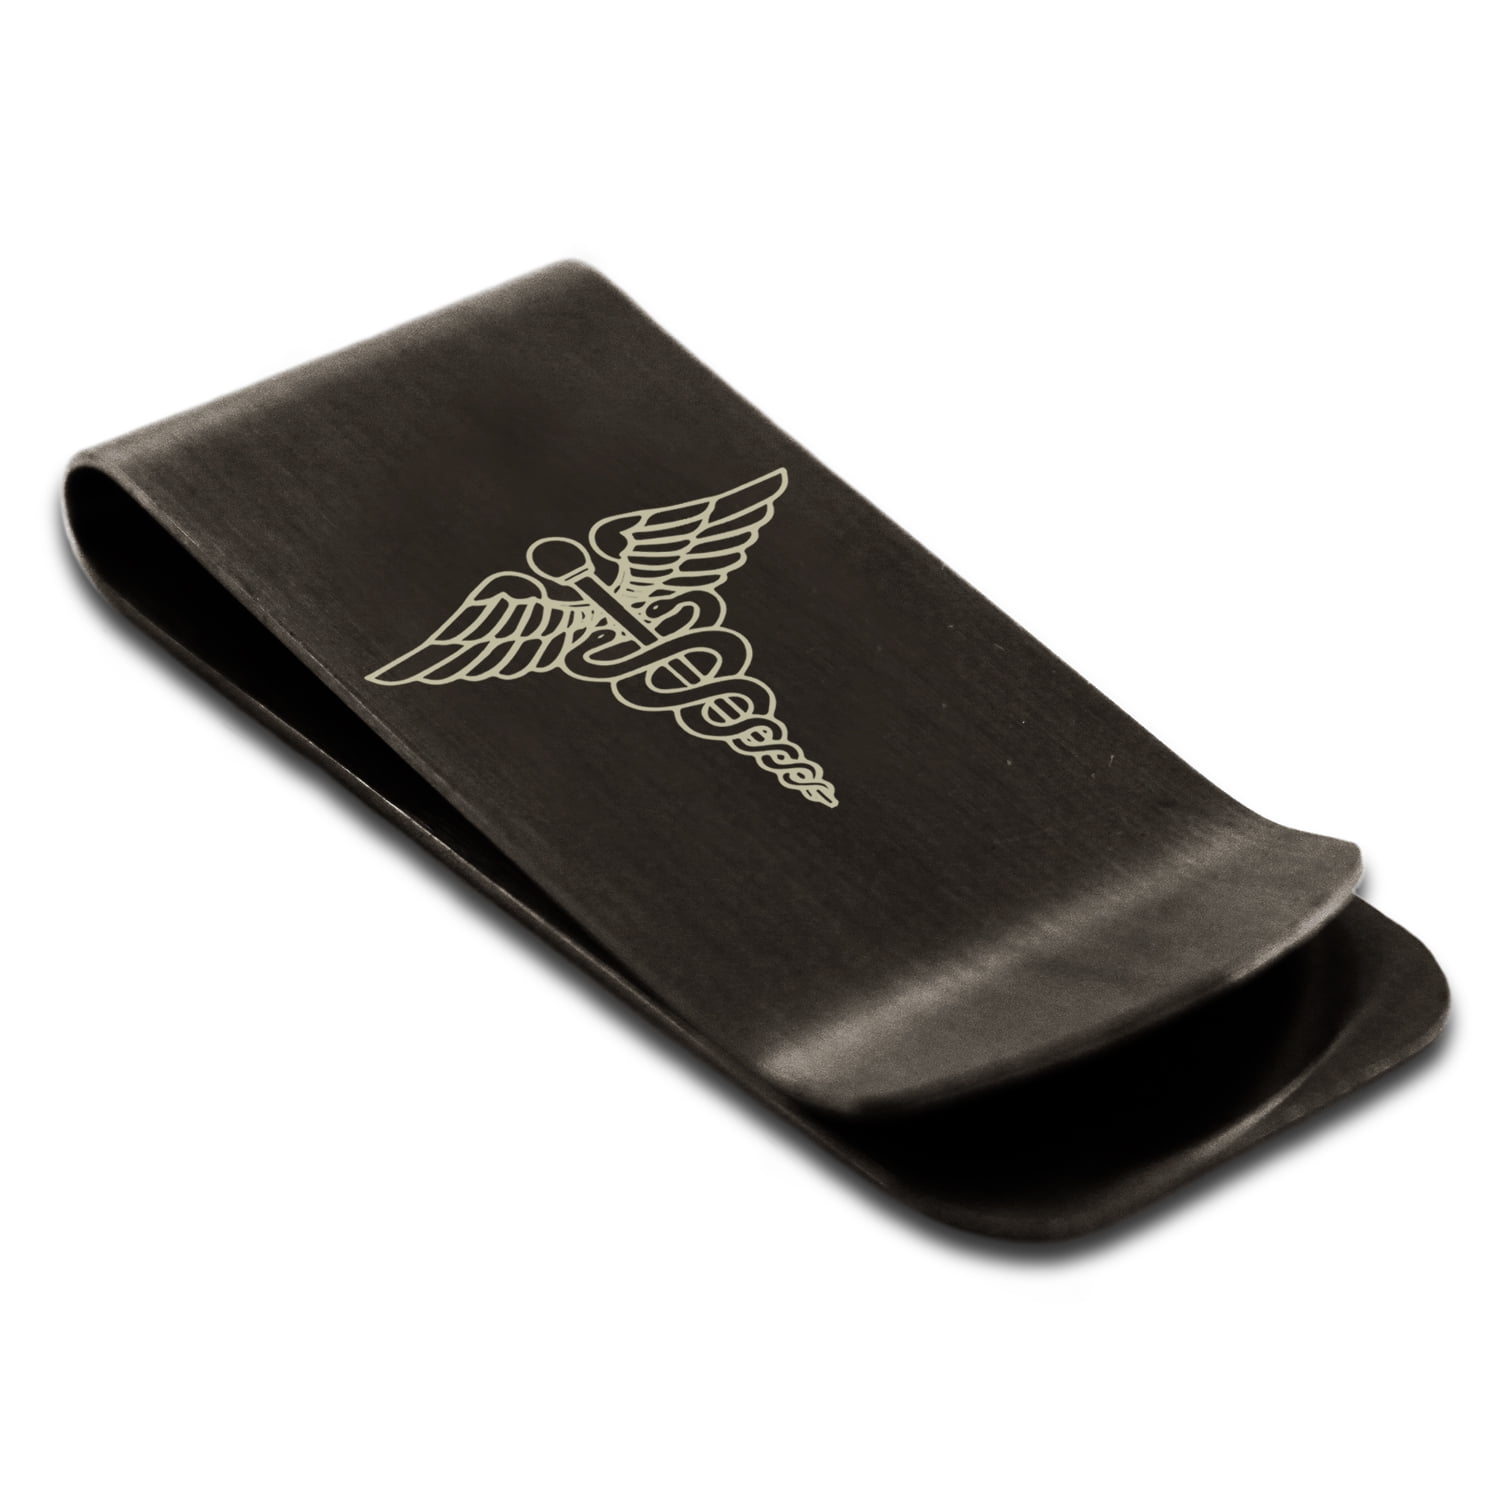 Personalized Engraving Included Money Clip Wallet Caduceus Medical Symbol